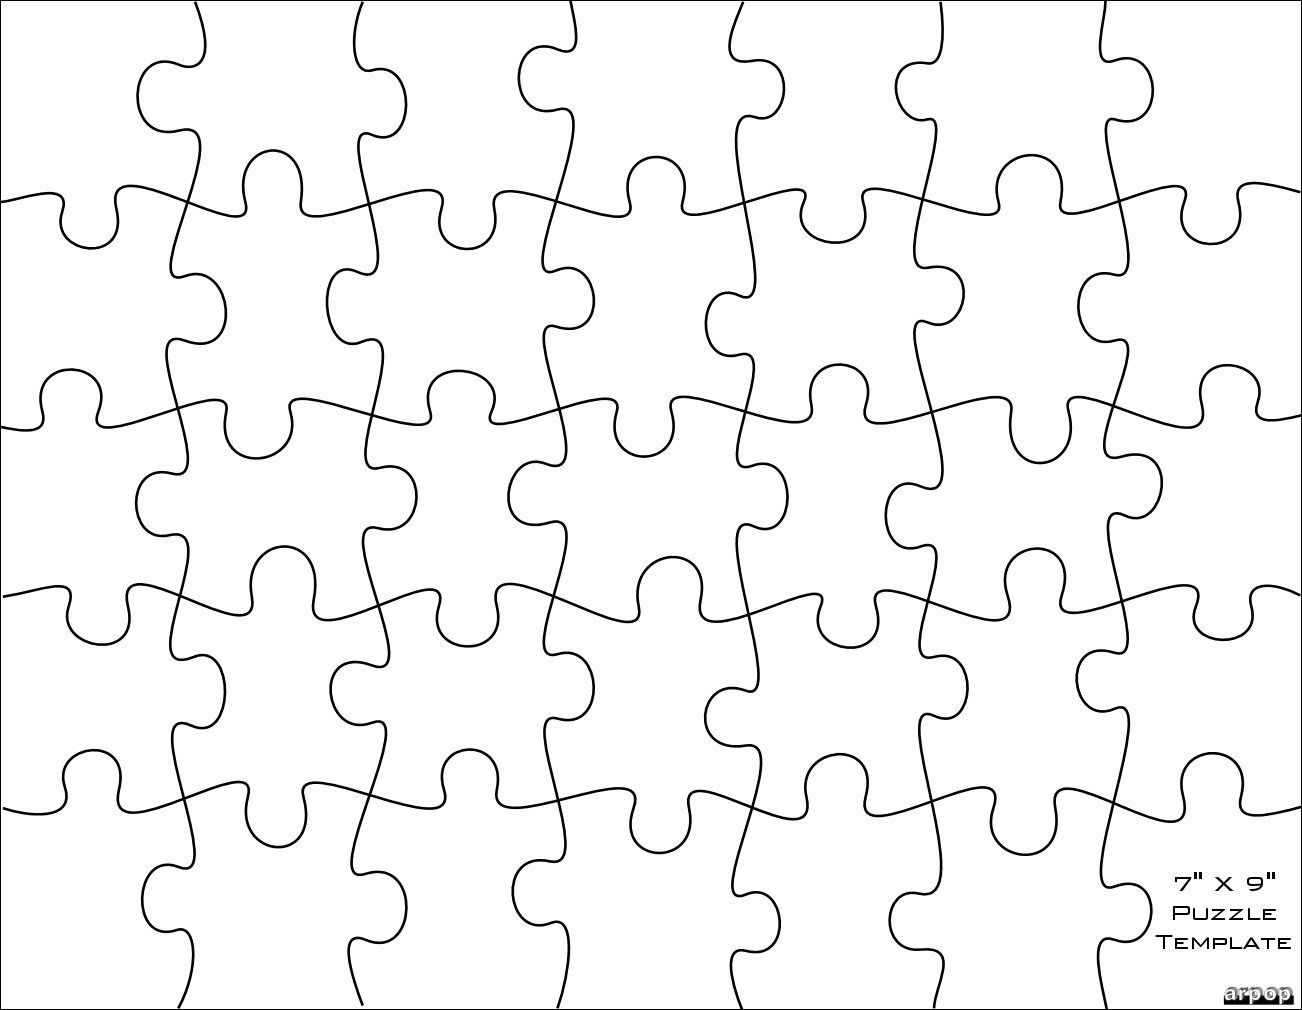 Jigsaw Pattern Templates. I Know I Want To Use It, But I Don&amp;#039;t Know - 7 Piece Printable Puzzle